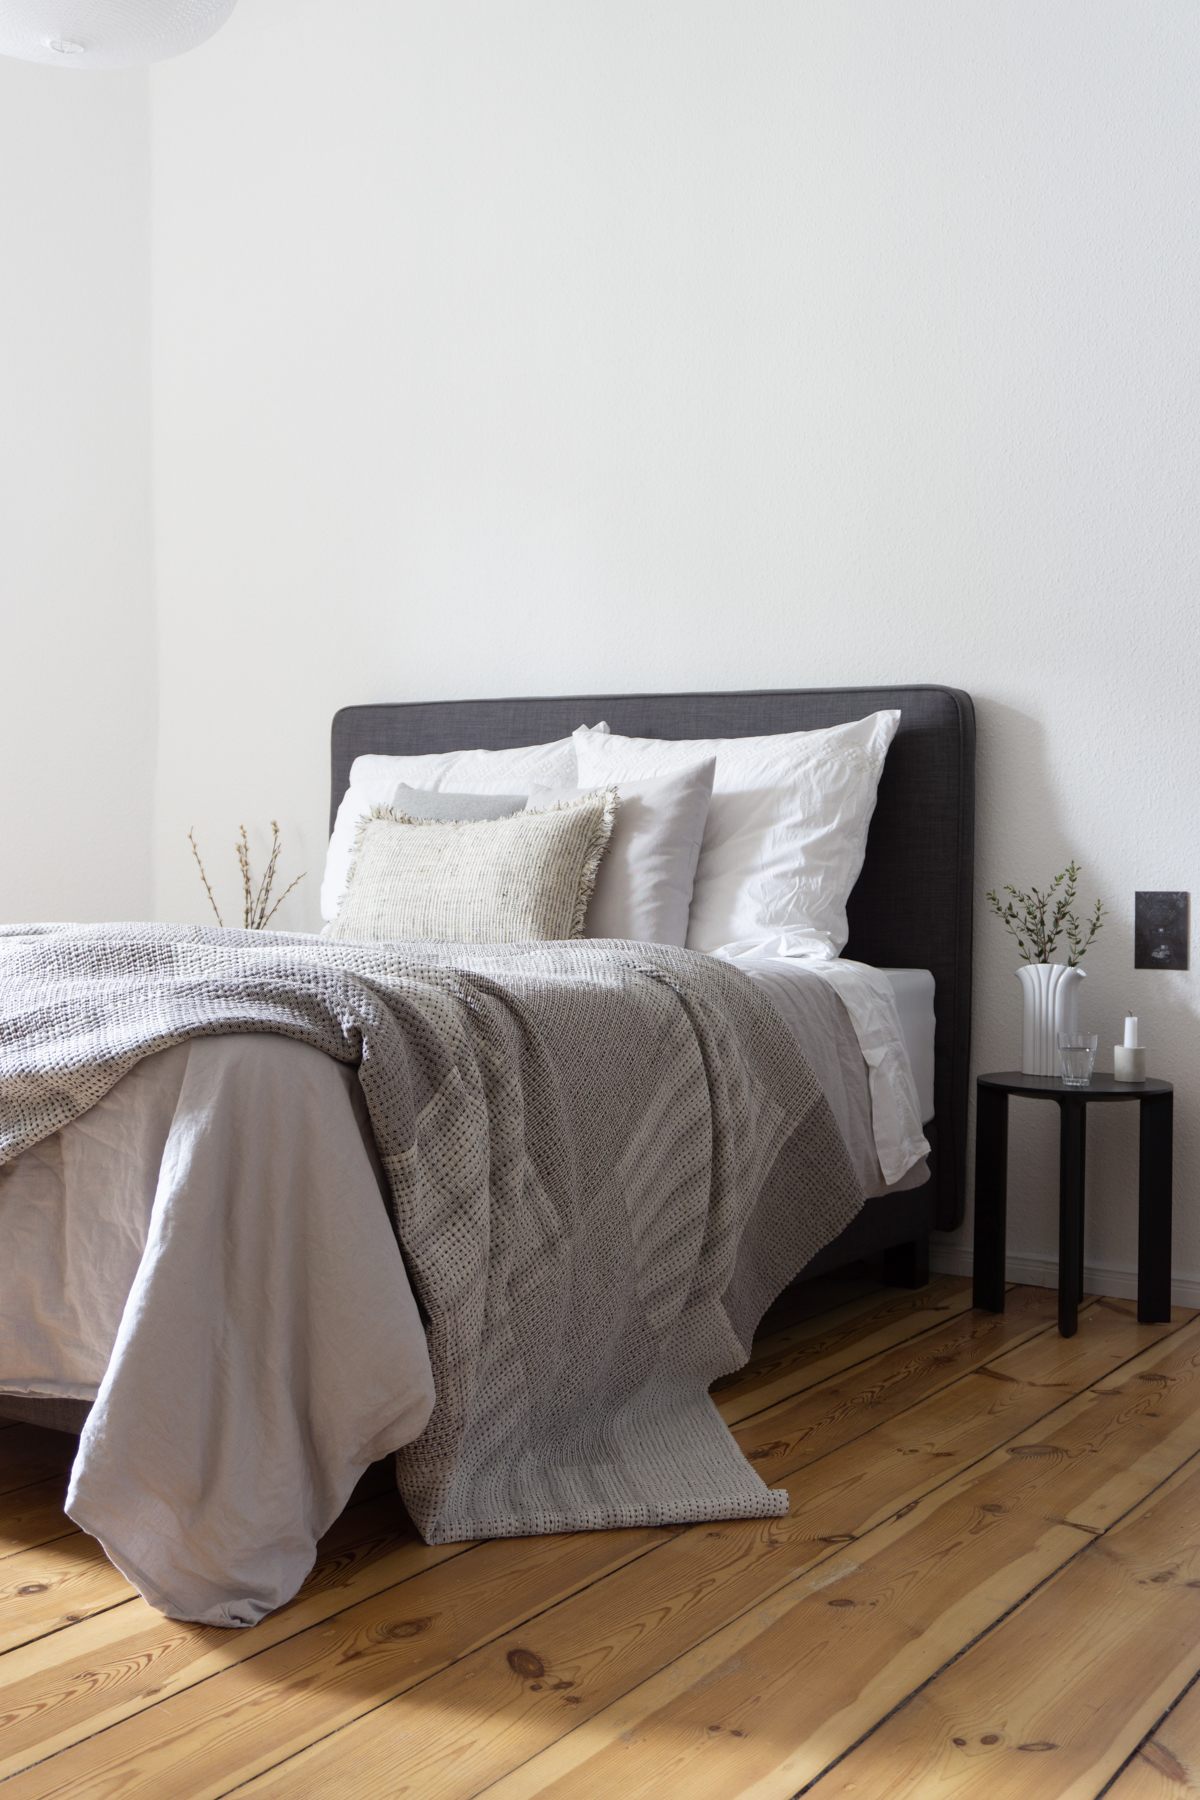 Sustainable Ethical and Scandinavian Bedding from Stitch by Stitch, Minimalist Natural Bedroom Interior Inspo / RG Daily Blog